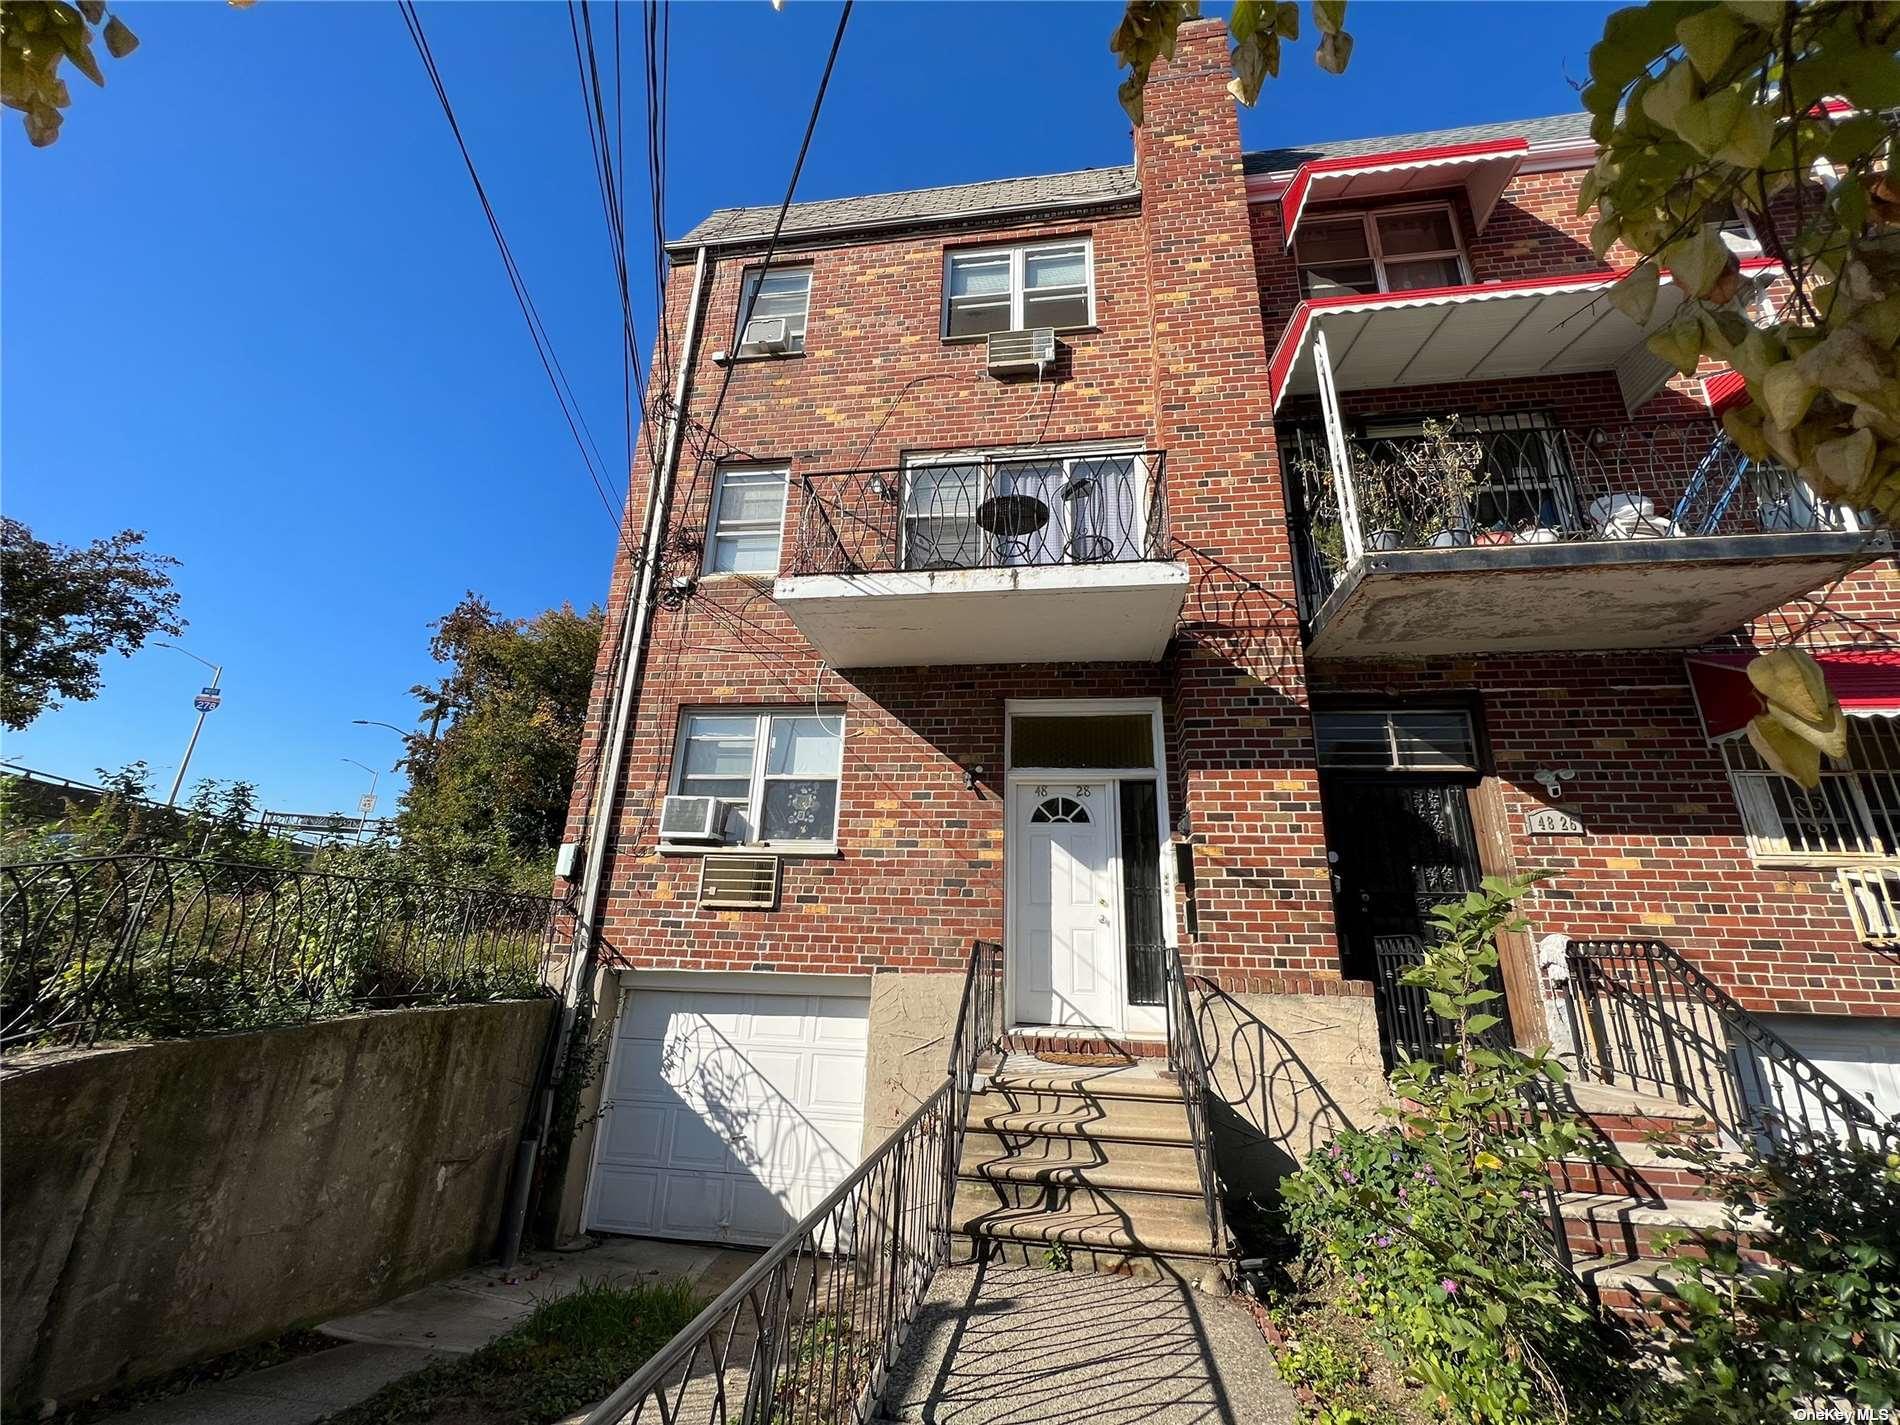 48-28 59 Place in Queens, Flushing, NY 11377